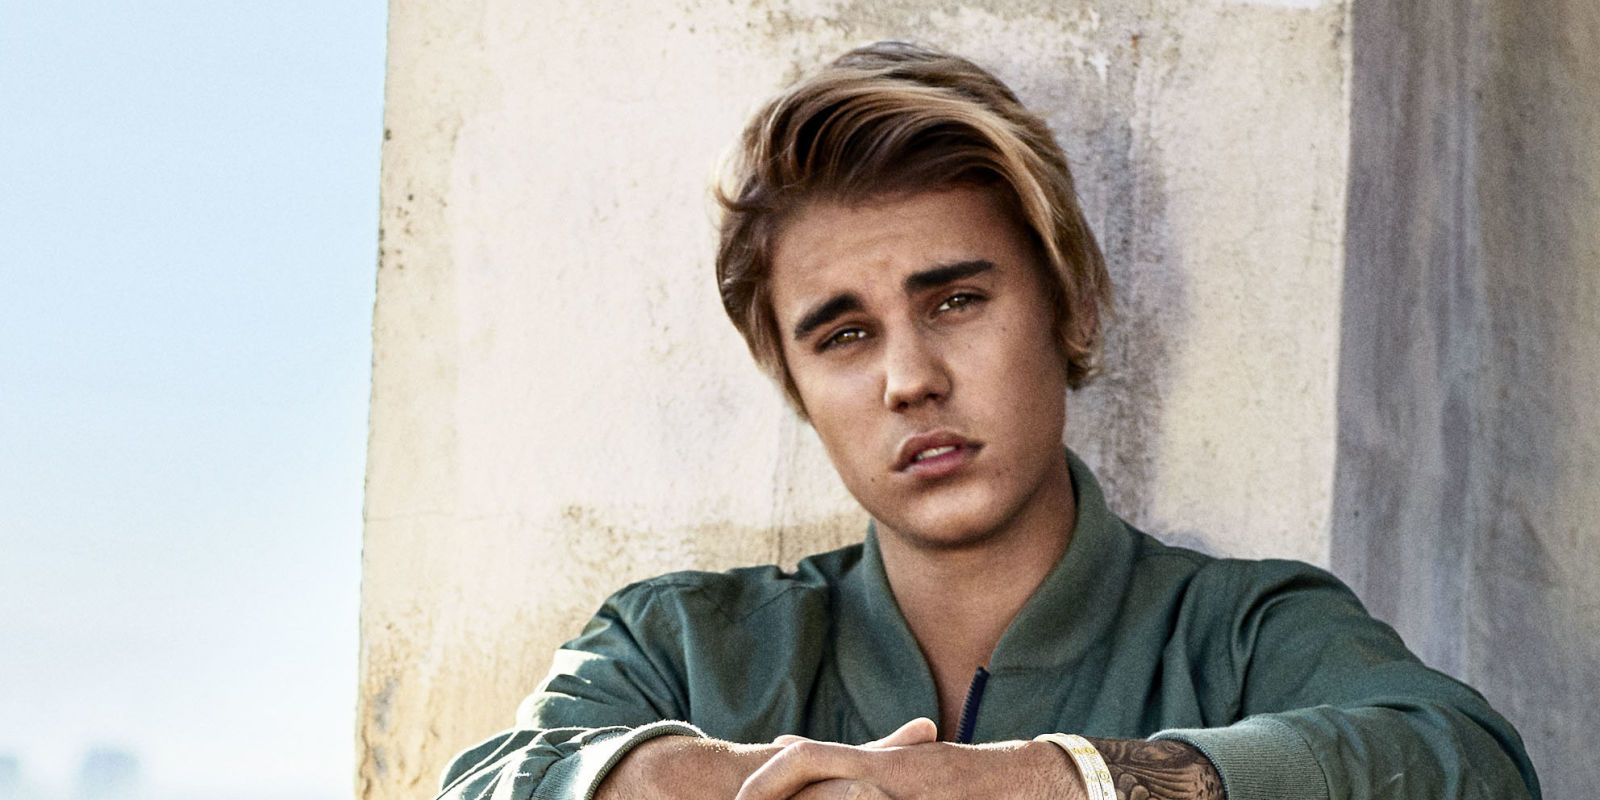 Best Justin Bieber Full HD Wallpaper Photos And New